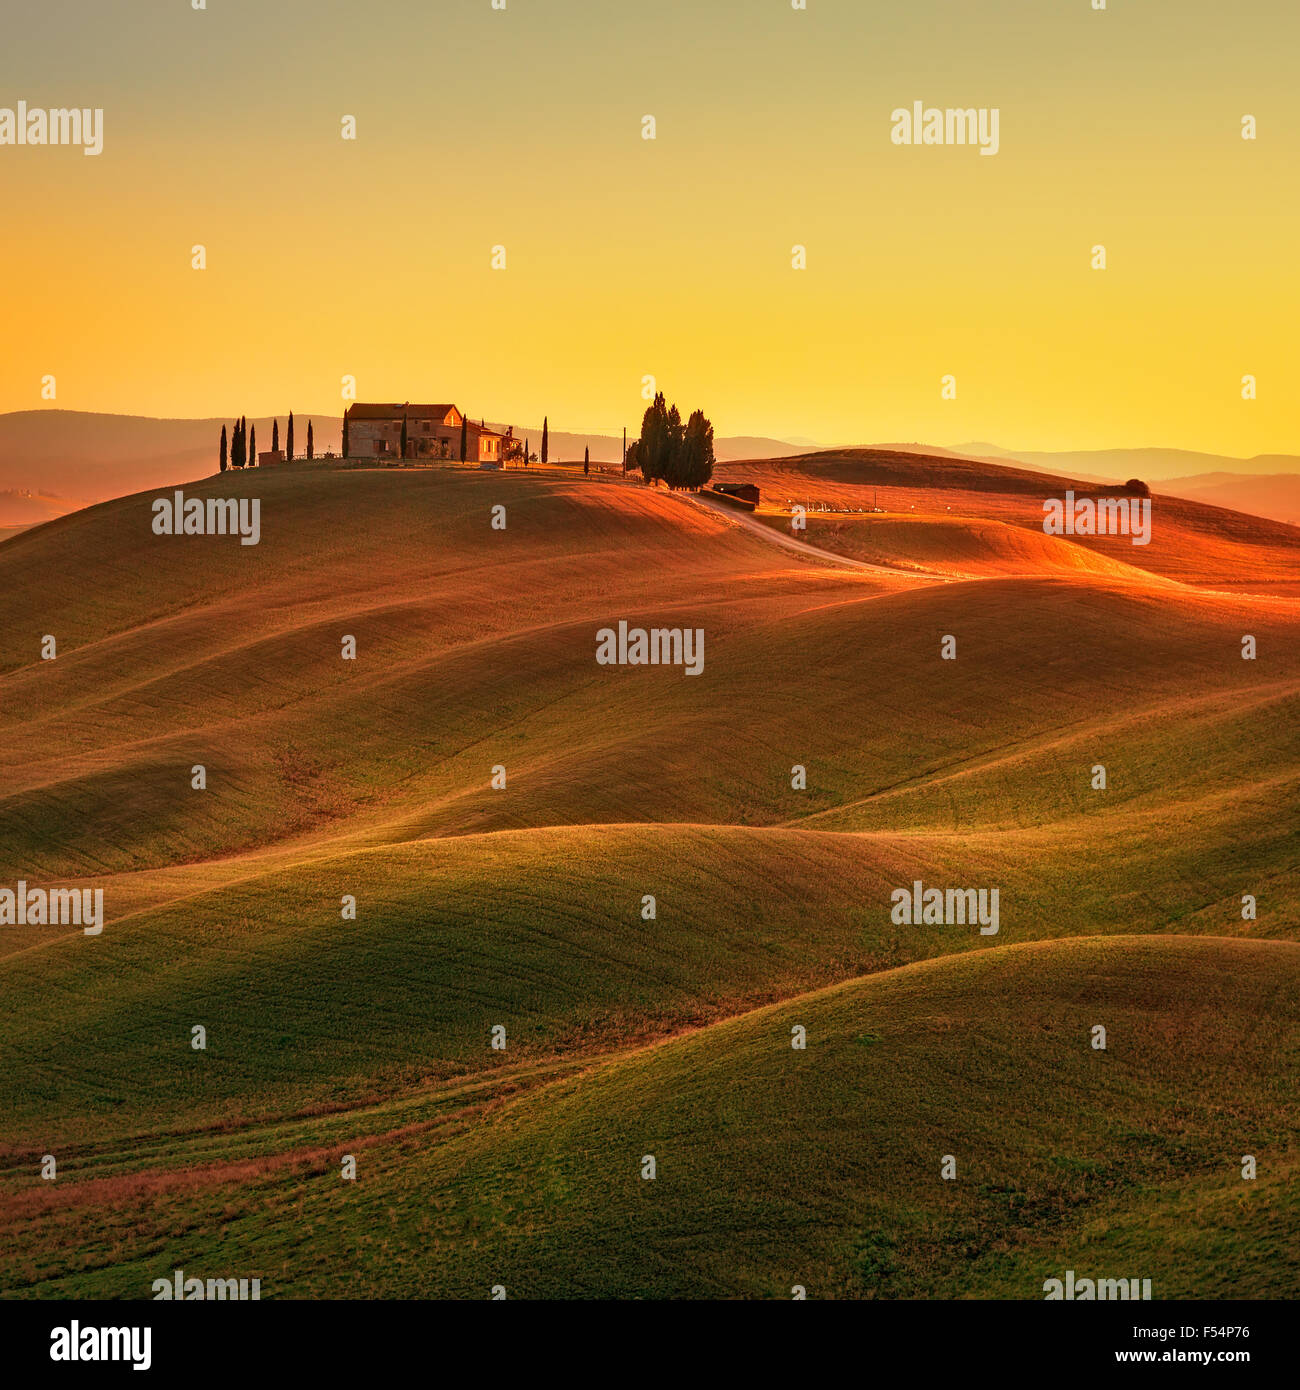 Tuscany, rural landscape in Crete Senesi land. Rolling hills, countryside farm, cypresses trees, green field on warm sunset. Stock Photo